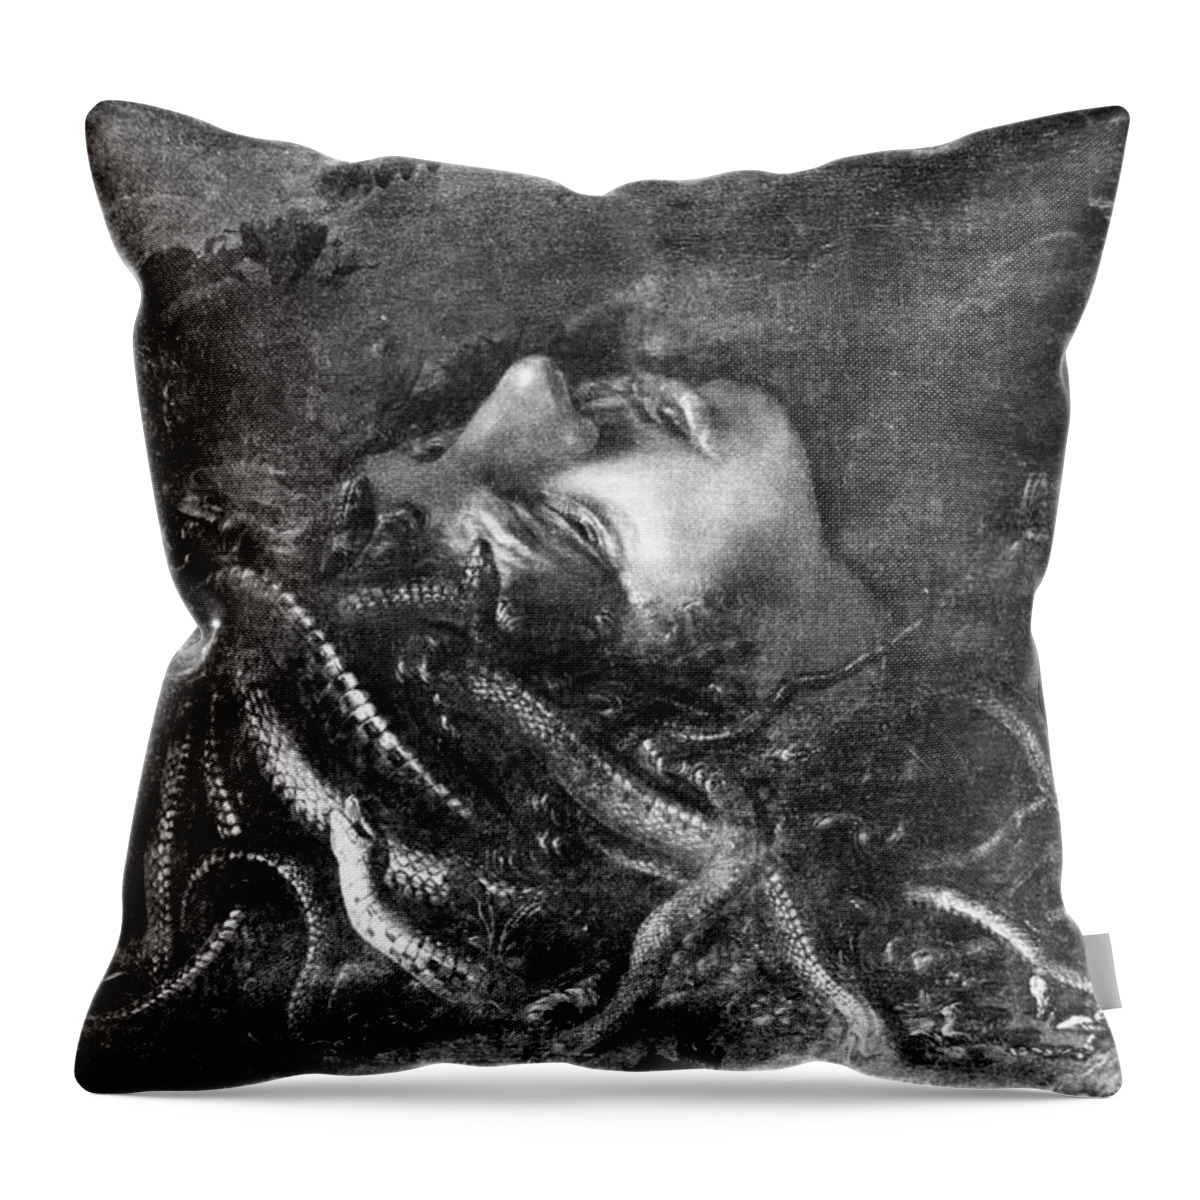 15th Century Throw Pillow featuring the photograph Mythology: Medusa #1 by Granger